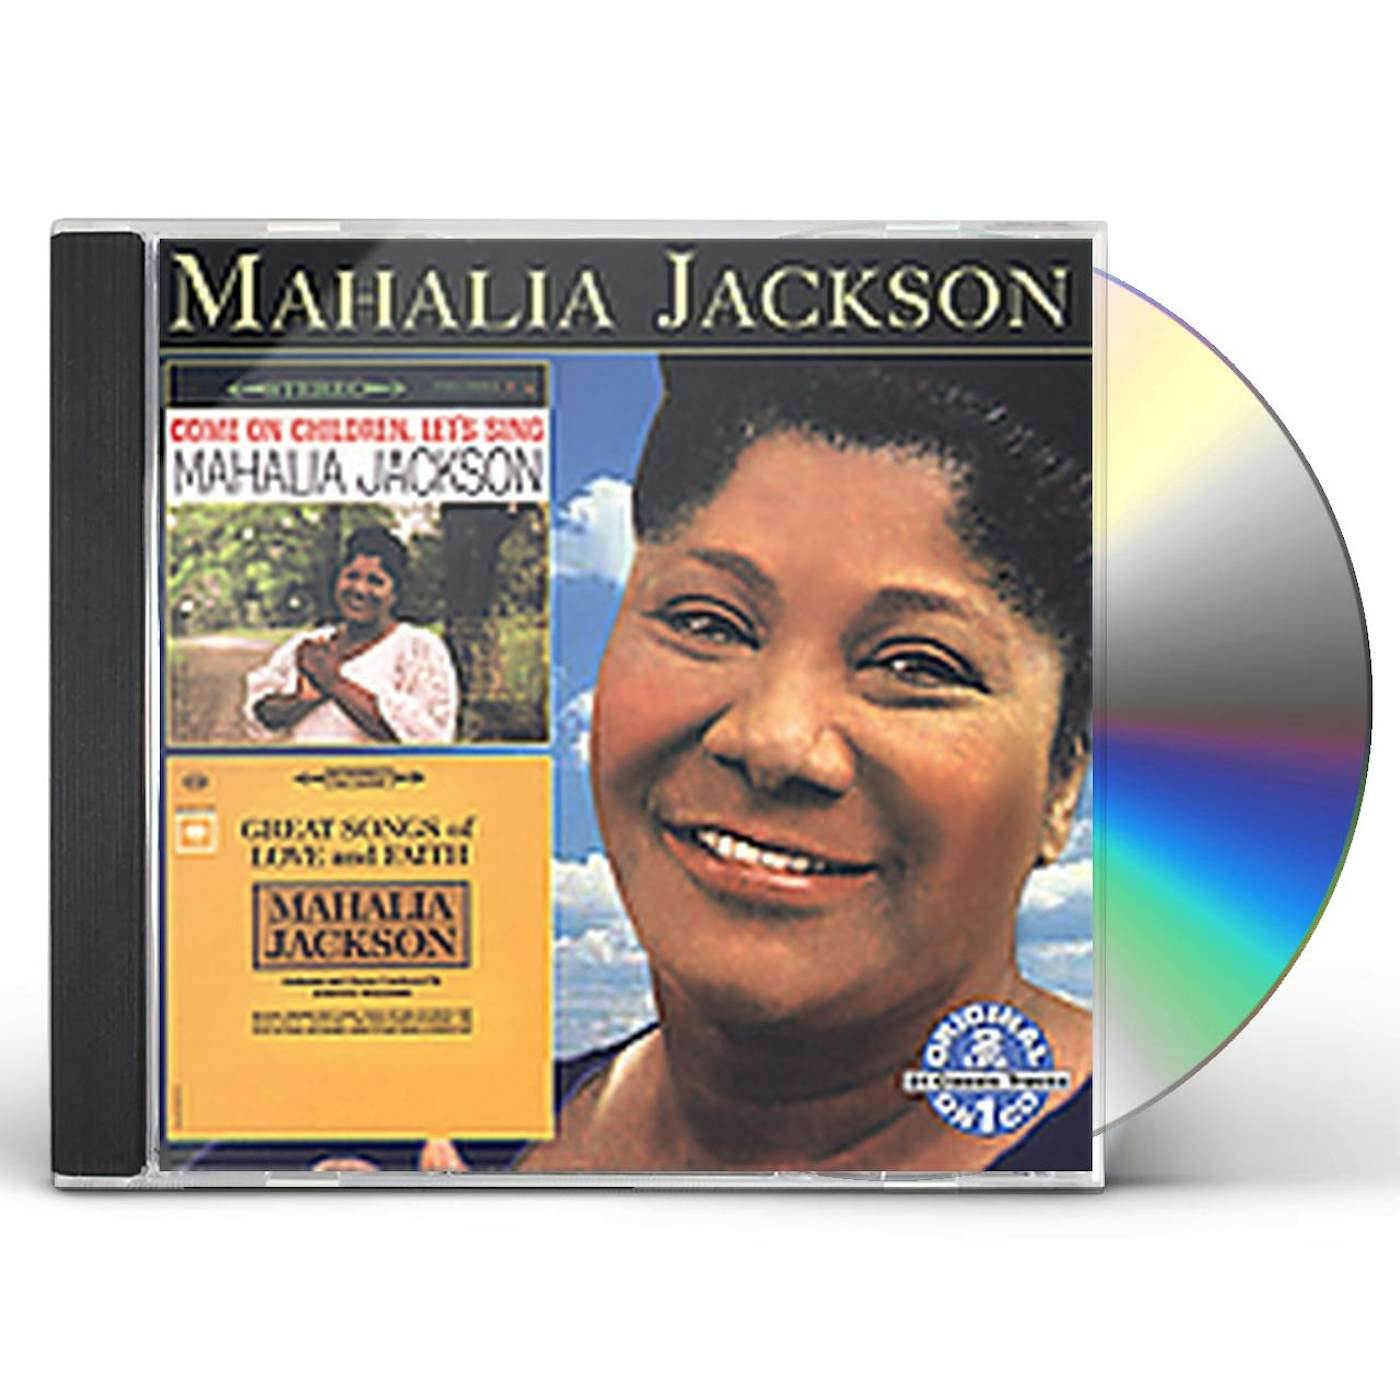 Mahalia Jackson COME ON CHILDREN LET'S SING: GREAT SONGS OF LOVE & CD